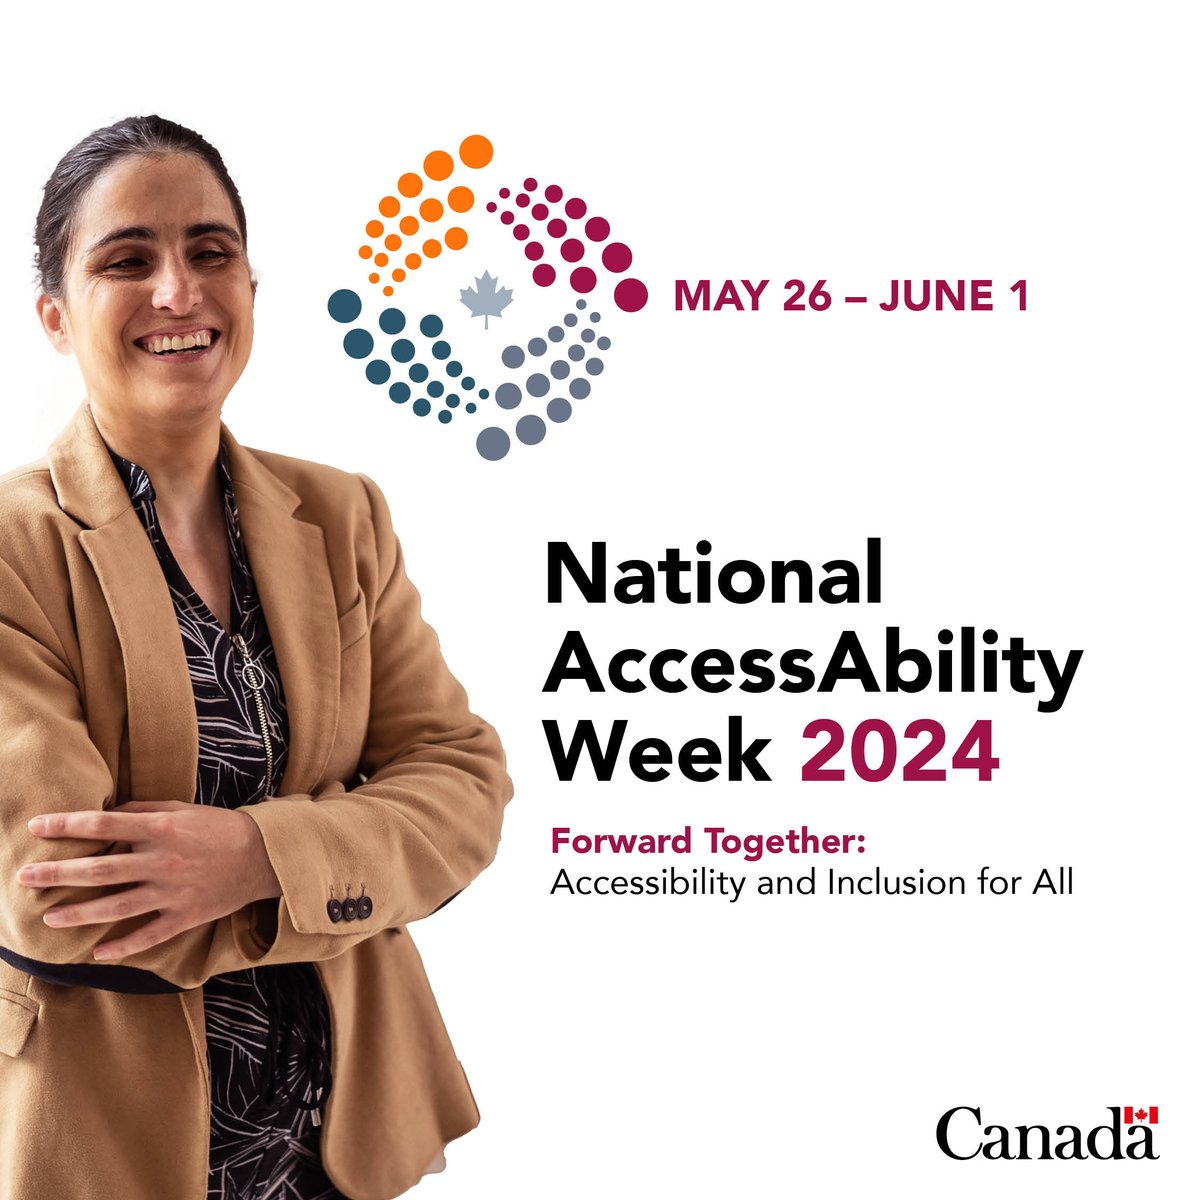 During National AccessAbility Week, we celebrate  the work individuals & organizations are doing for accessibility & disability inclusion. Let’s continue to work towards a more accessible & inclusive country. Together, we can achieve accessibility and #InclusionForAll. #NAAW2024